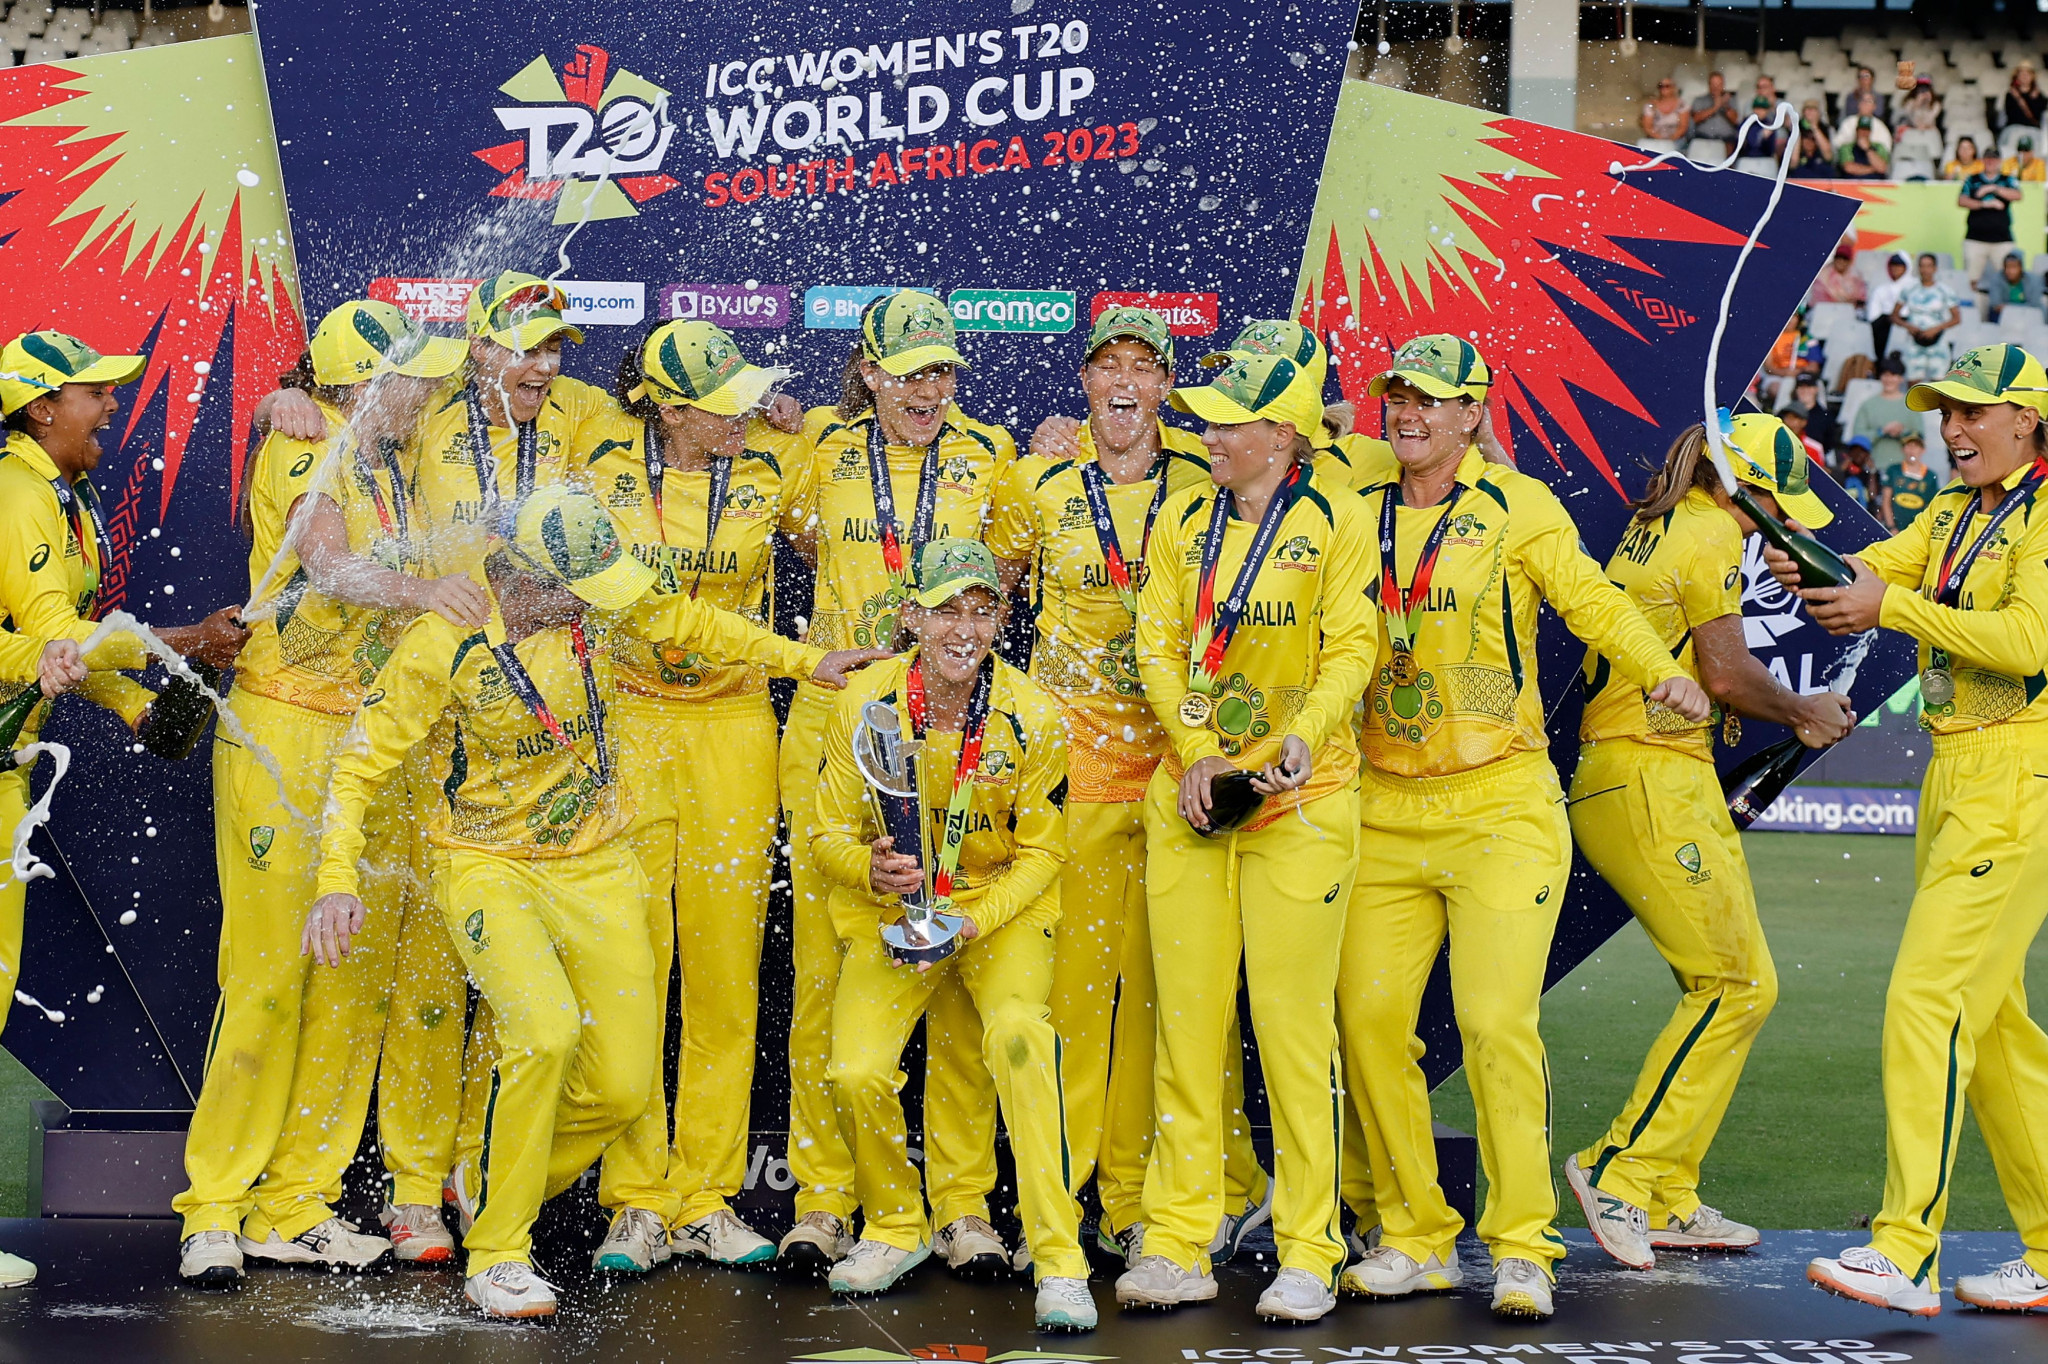 Australia won their third consecutive ICC Women's T20 World Cup after defeating hosts South Africa in the final at Newlands in Cape Town ©Getty Images